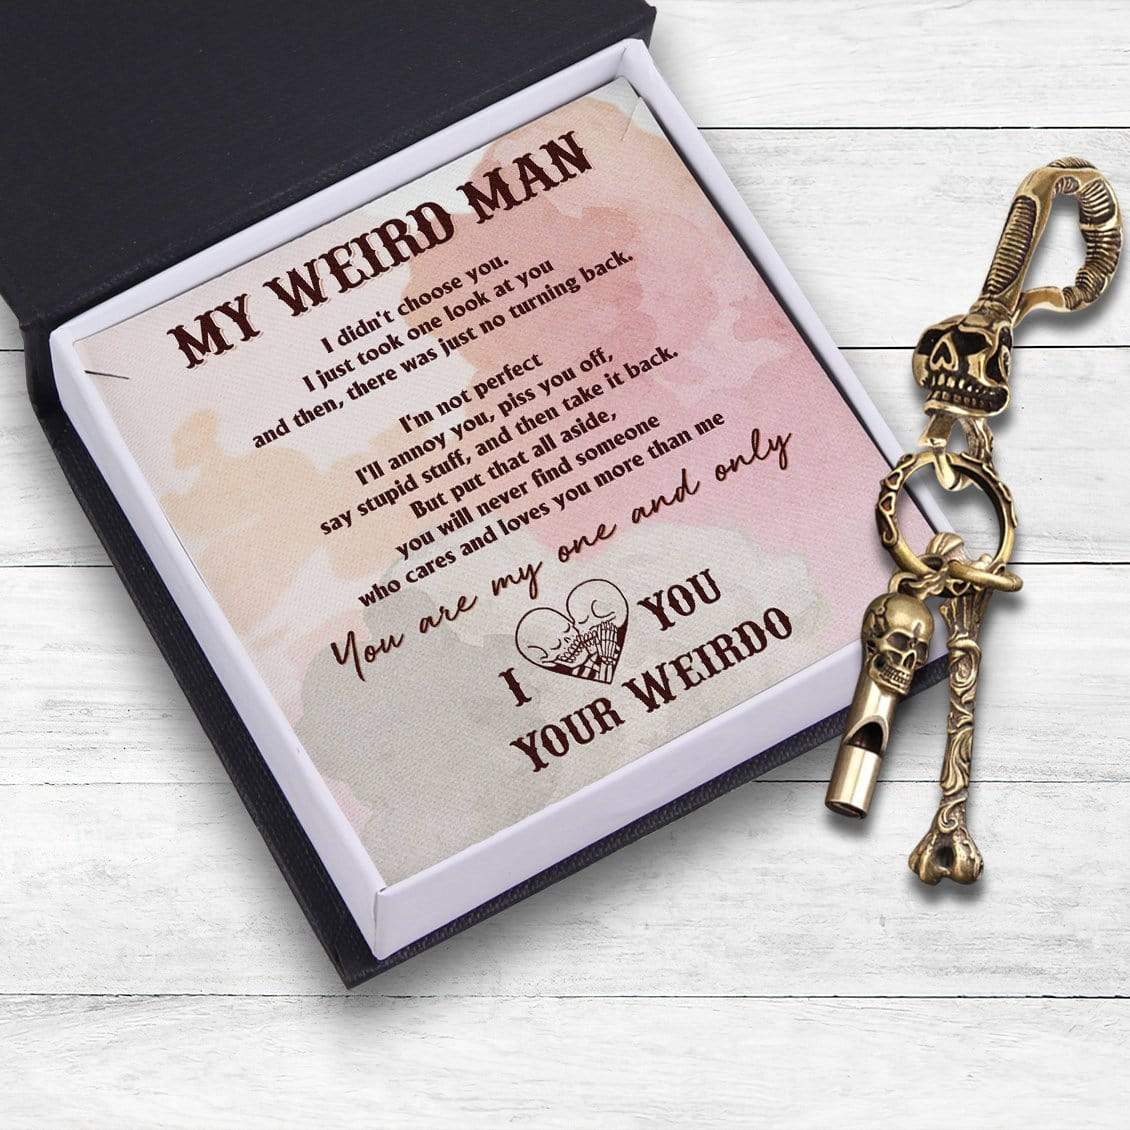 Skull Keychain Holder - Skull & Tattoo - My Weird Man - You Are My One And Only - Gkci26009